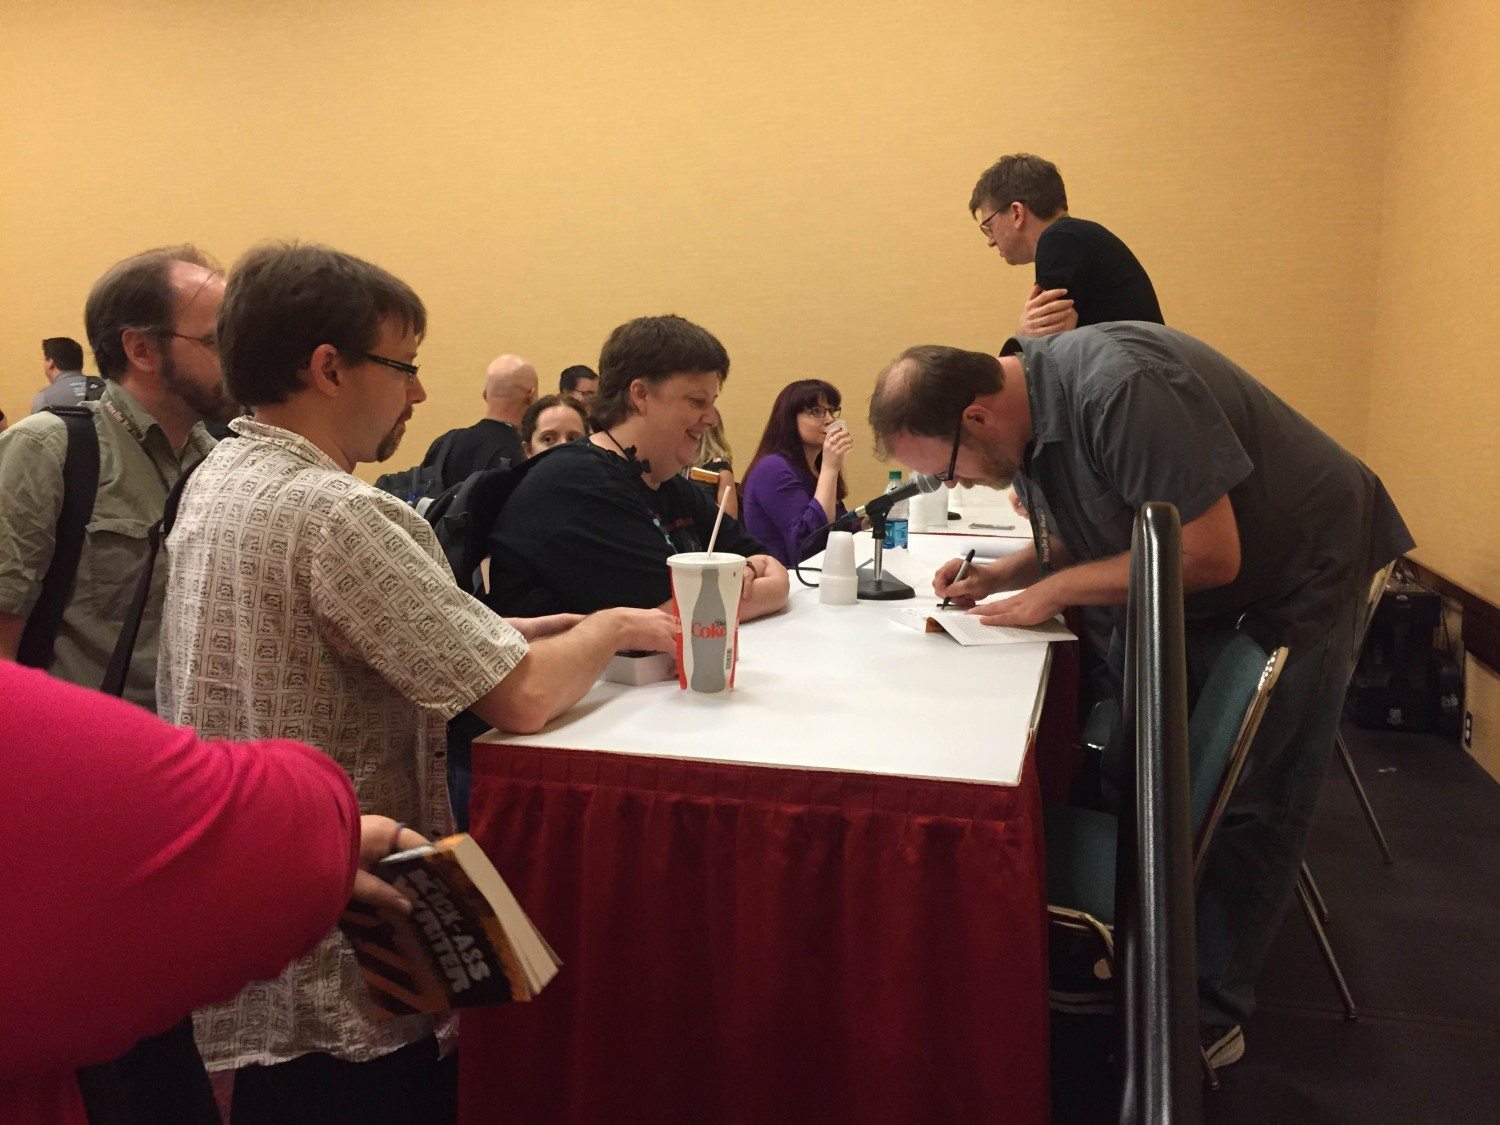 Chuck Wendig signs books for a fan after a panel